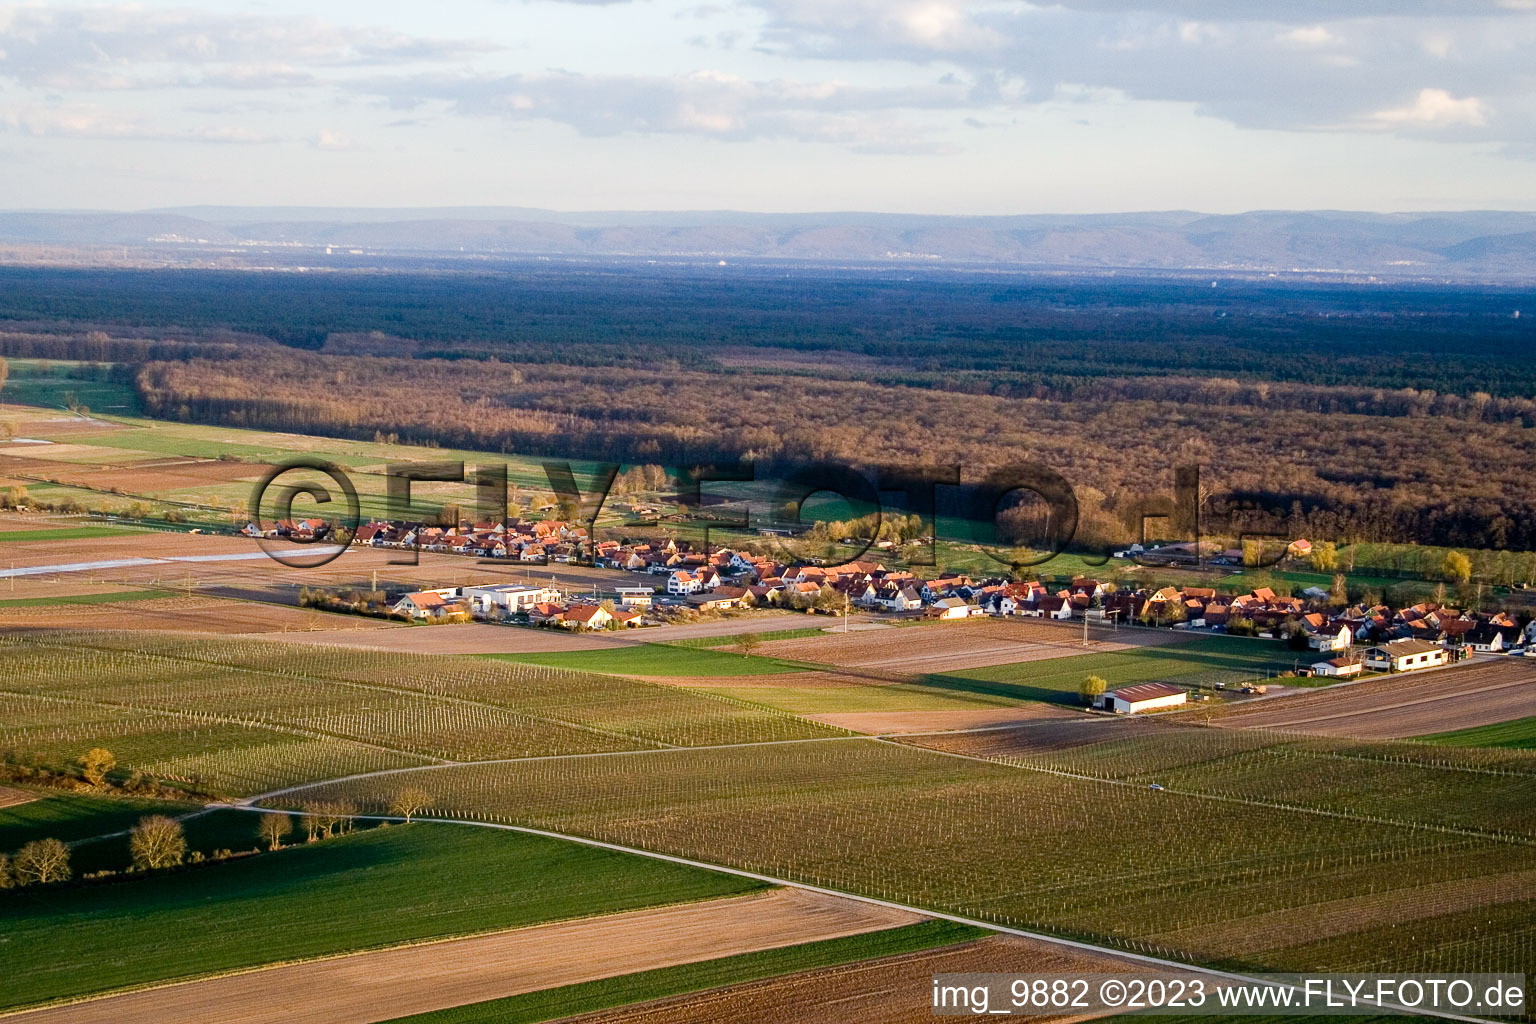 Freckenfeld in the state Rhineland-Palatinate, Germany from above